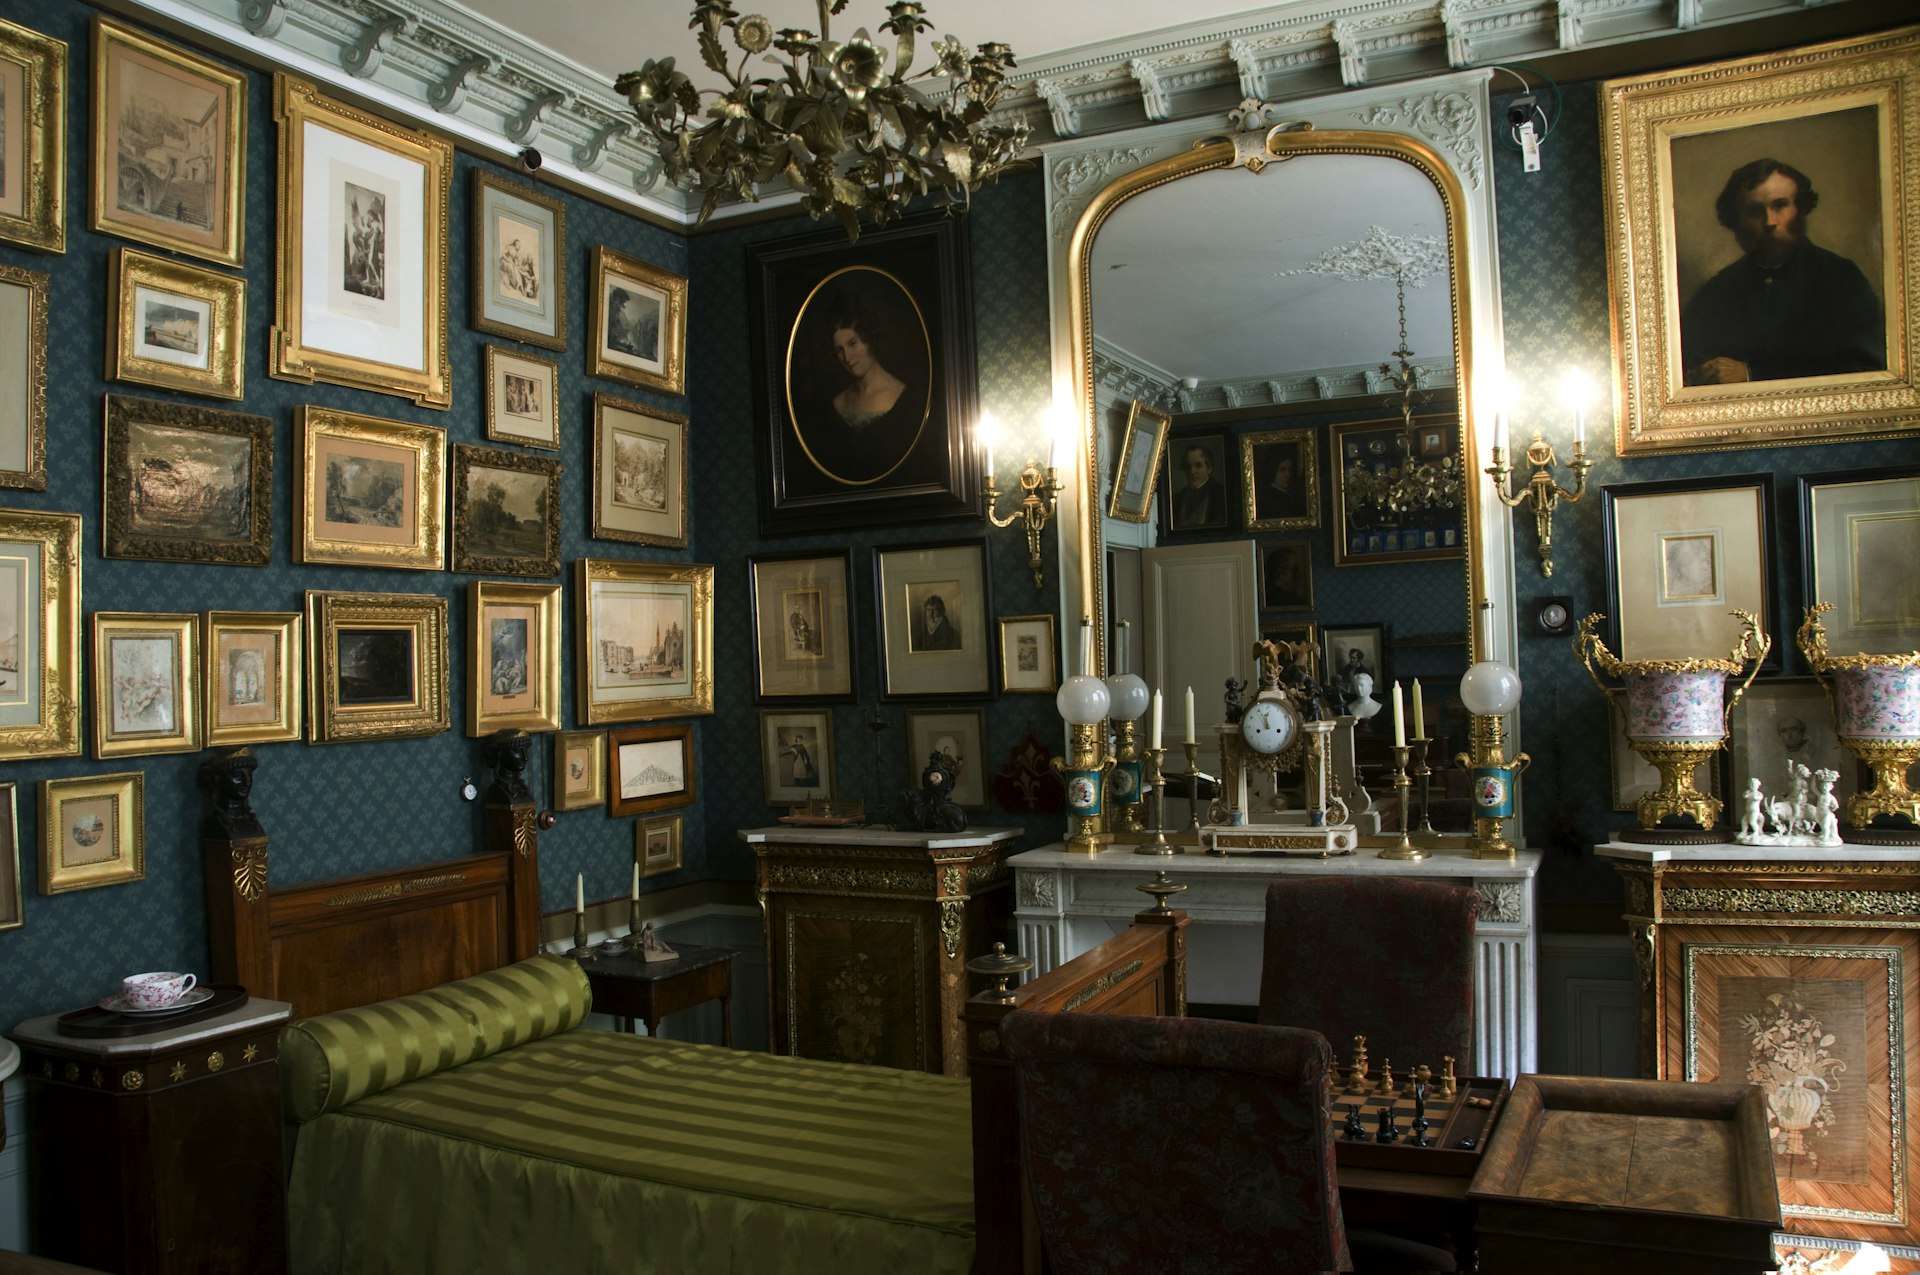 Drawings and other framed artworks in the house-museum Musée National Gustave Moreau, Paris France